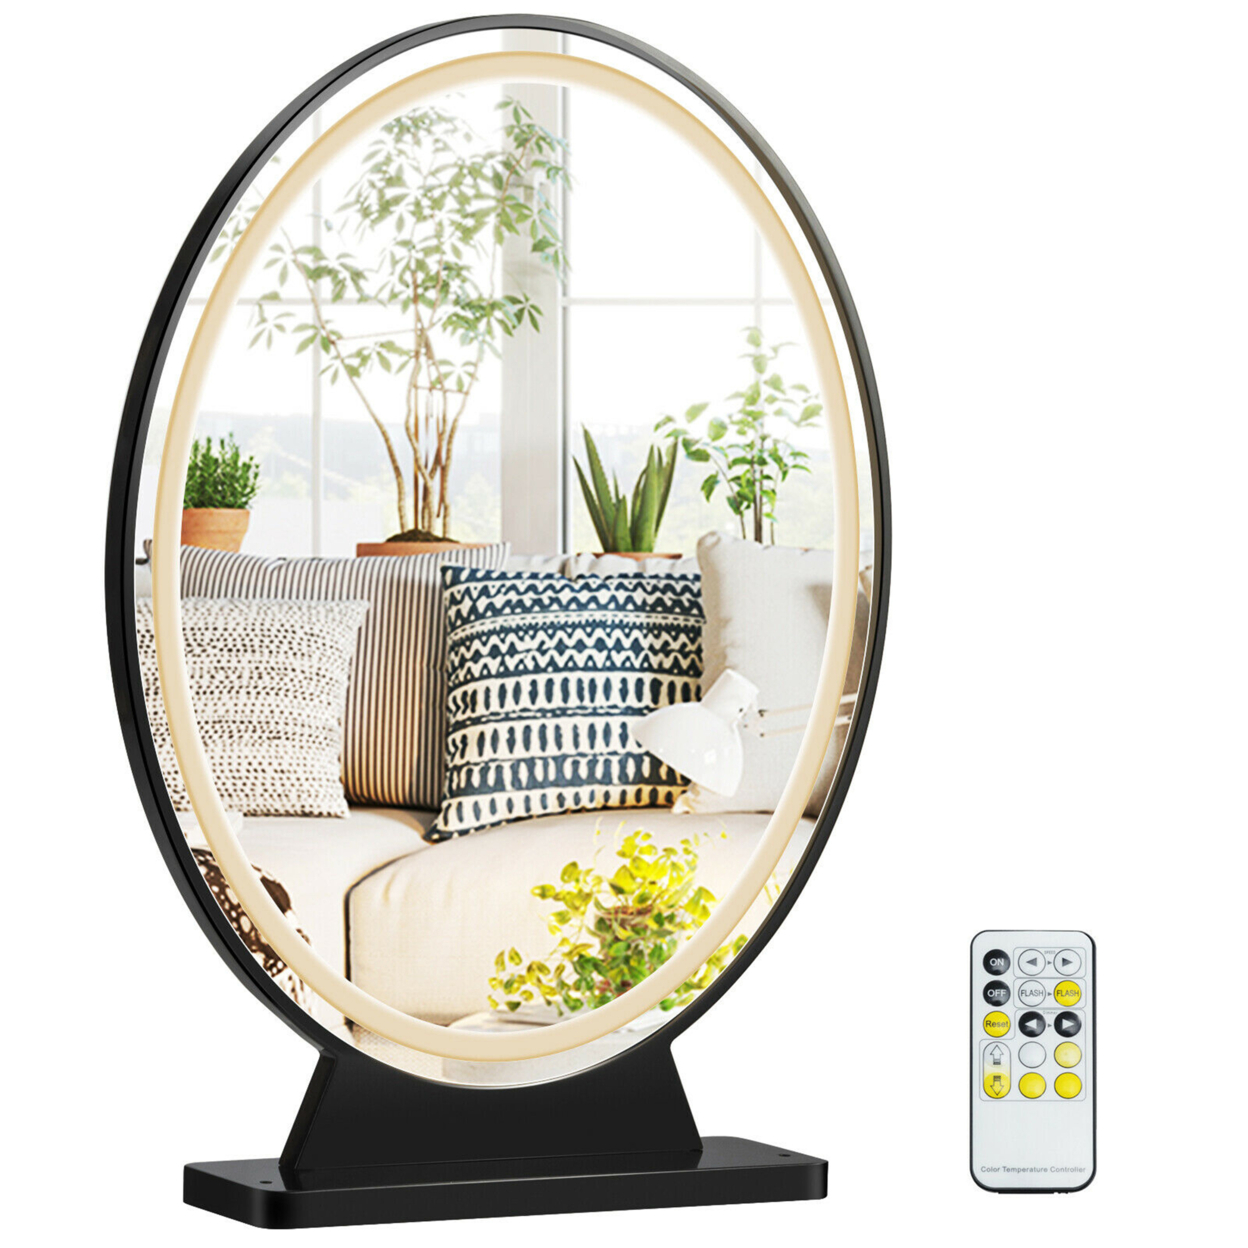 Hollywood Vanity Lighted Makeup Mirror Remote Control 4 Color Dimming Black/Gold/White - Black